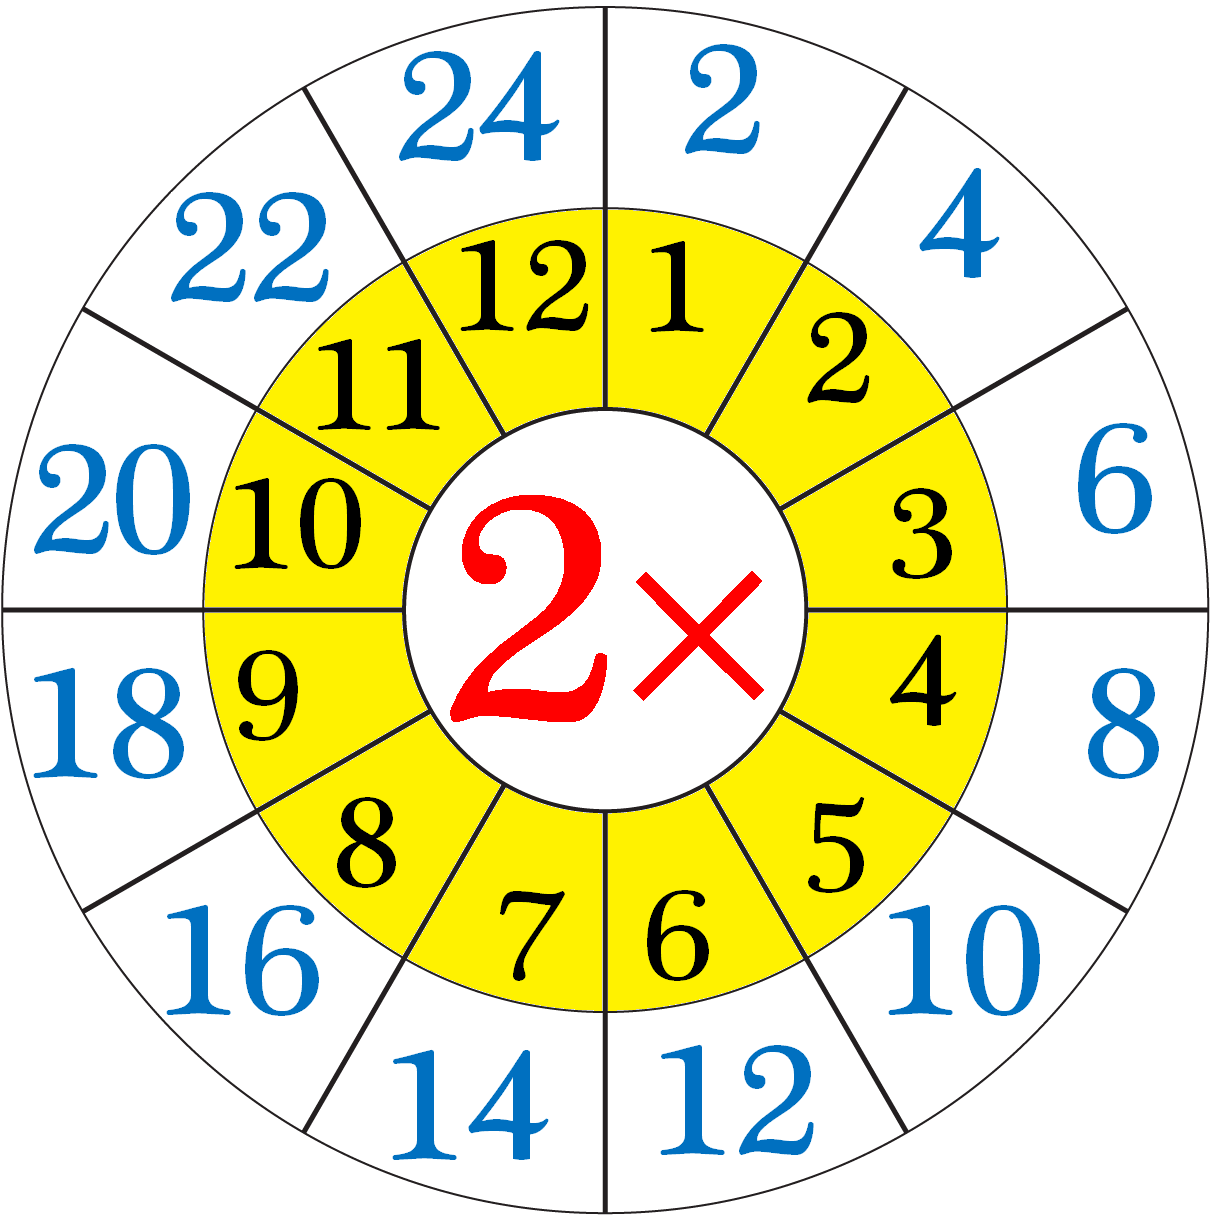 multiplication-table-of-2-repeated-addition-by-2-s-read-write-the-table-of-2